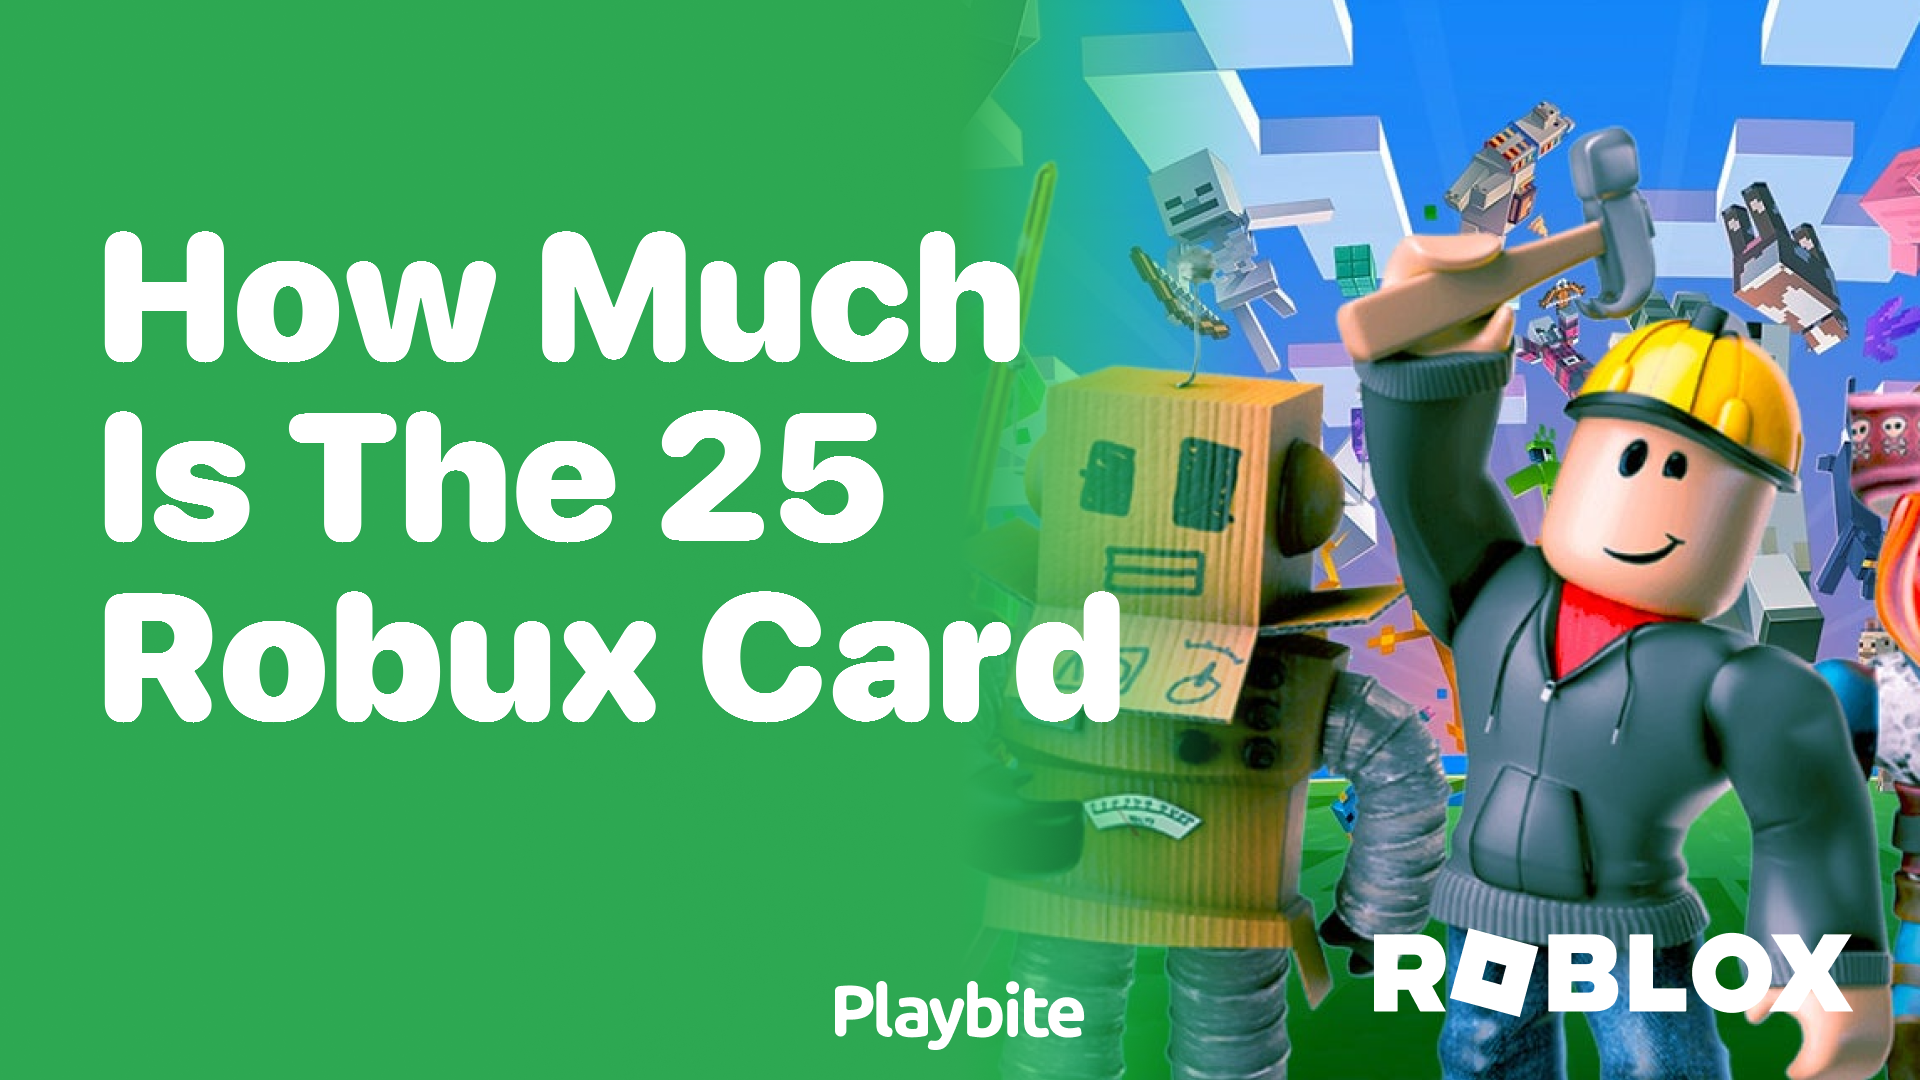 How Much Does a 25 Robux Card Cost?